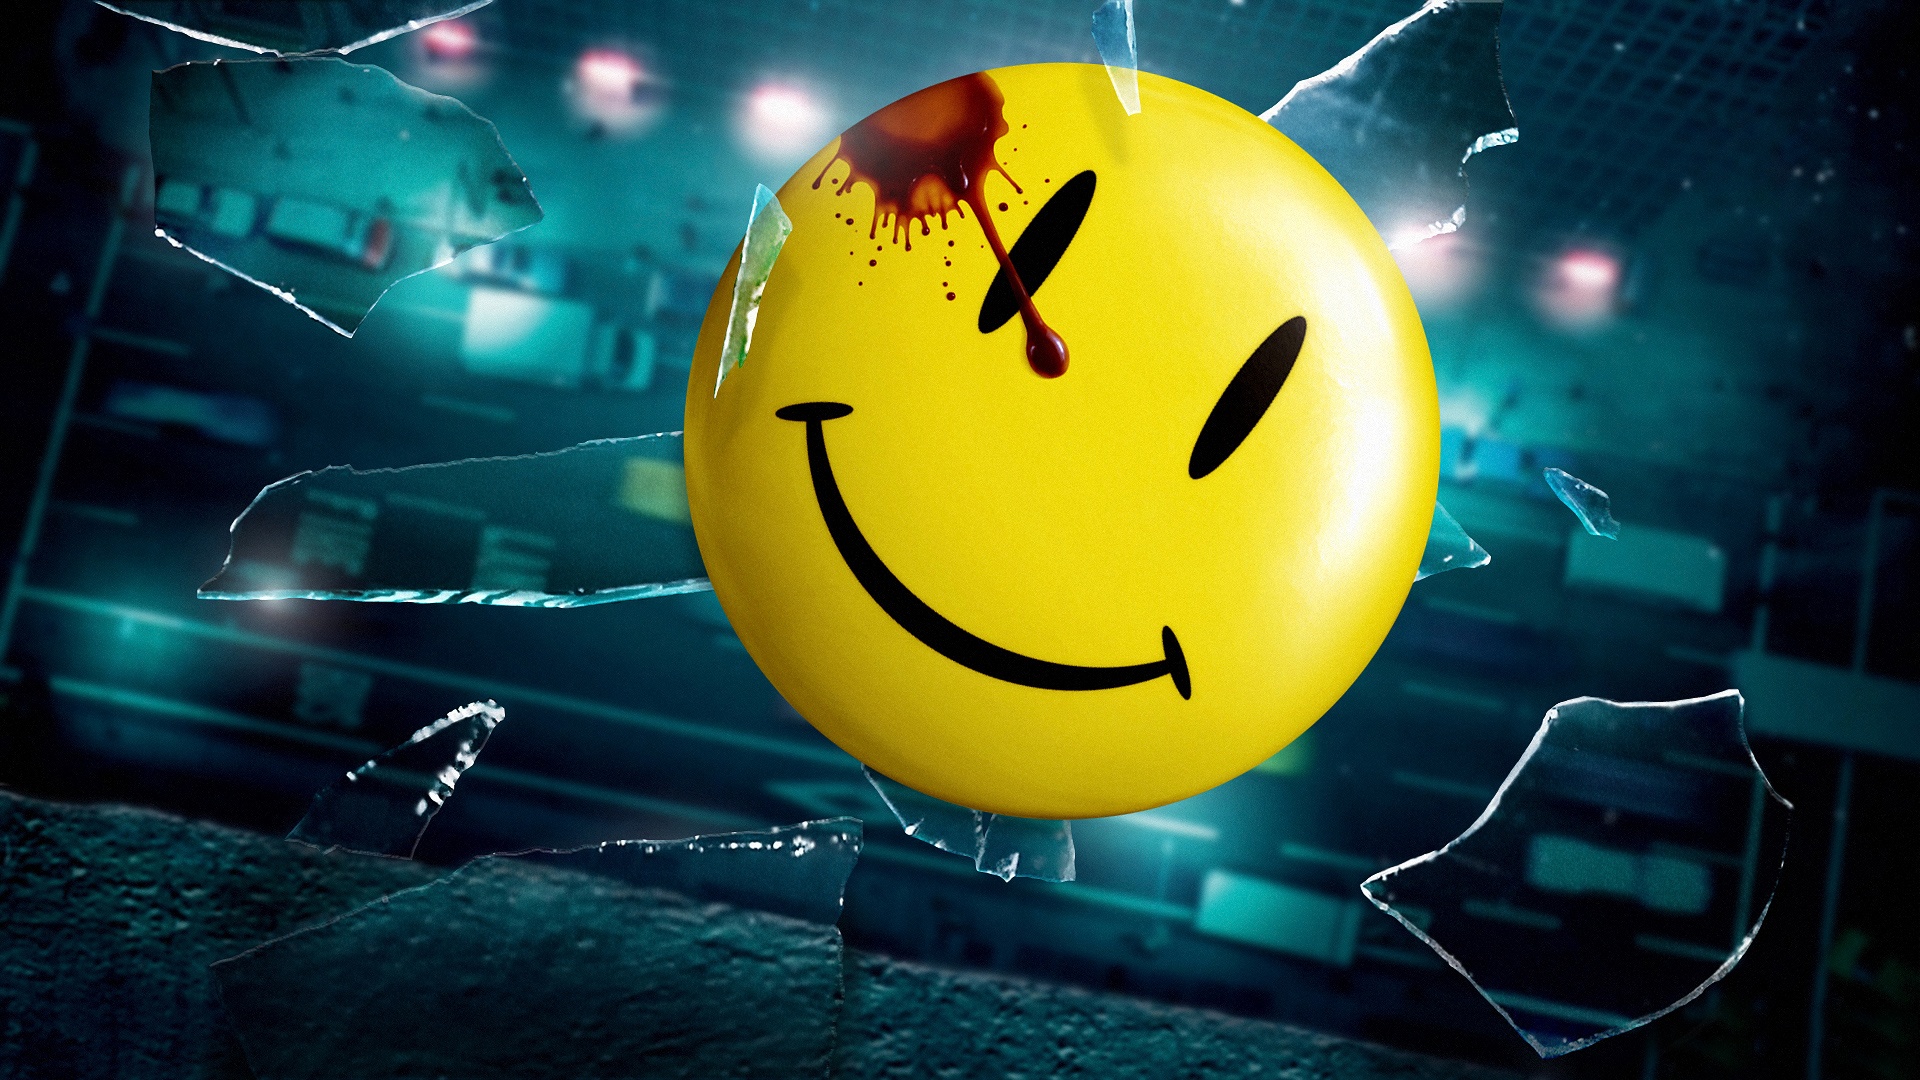 Smiley from Watchmen